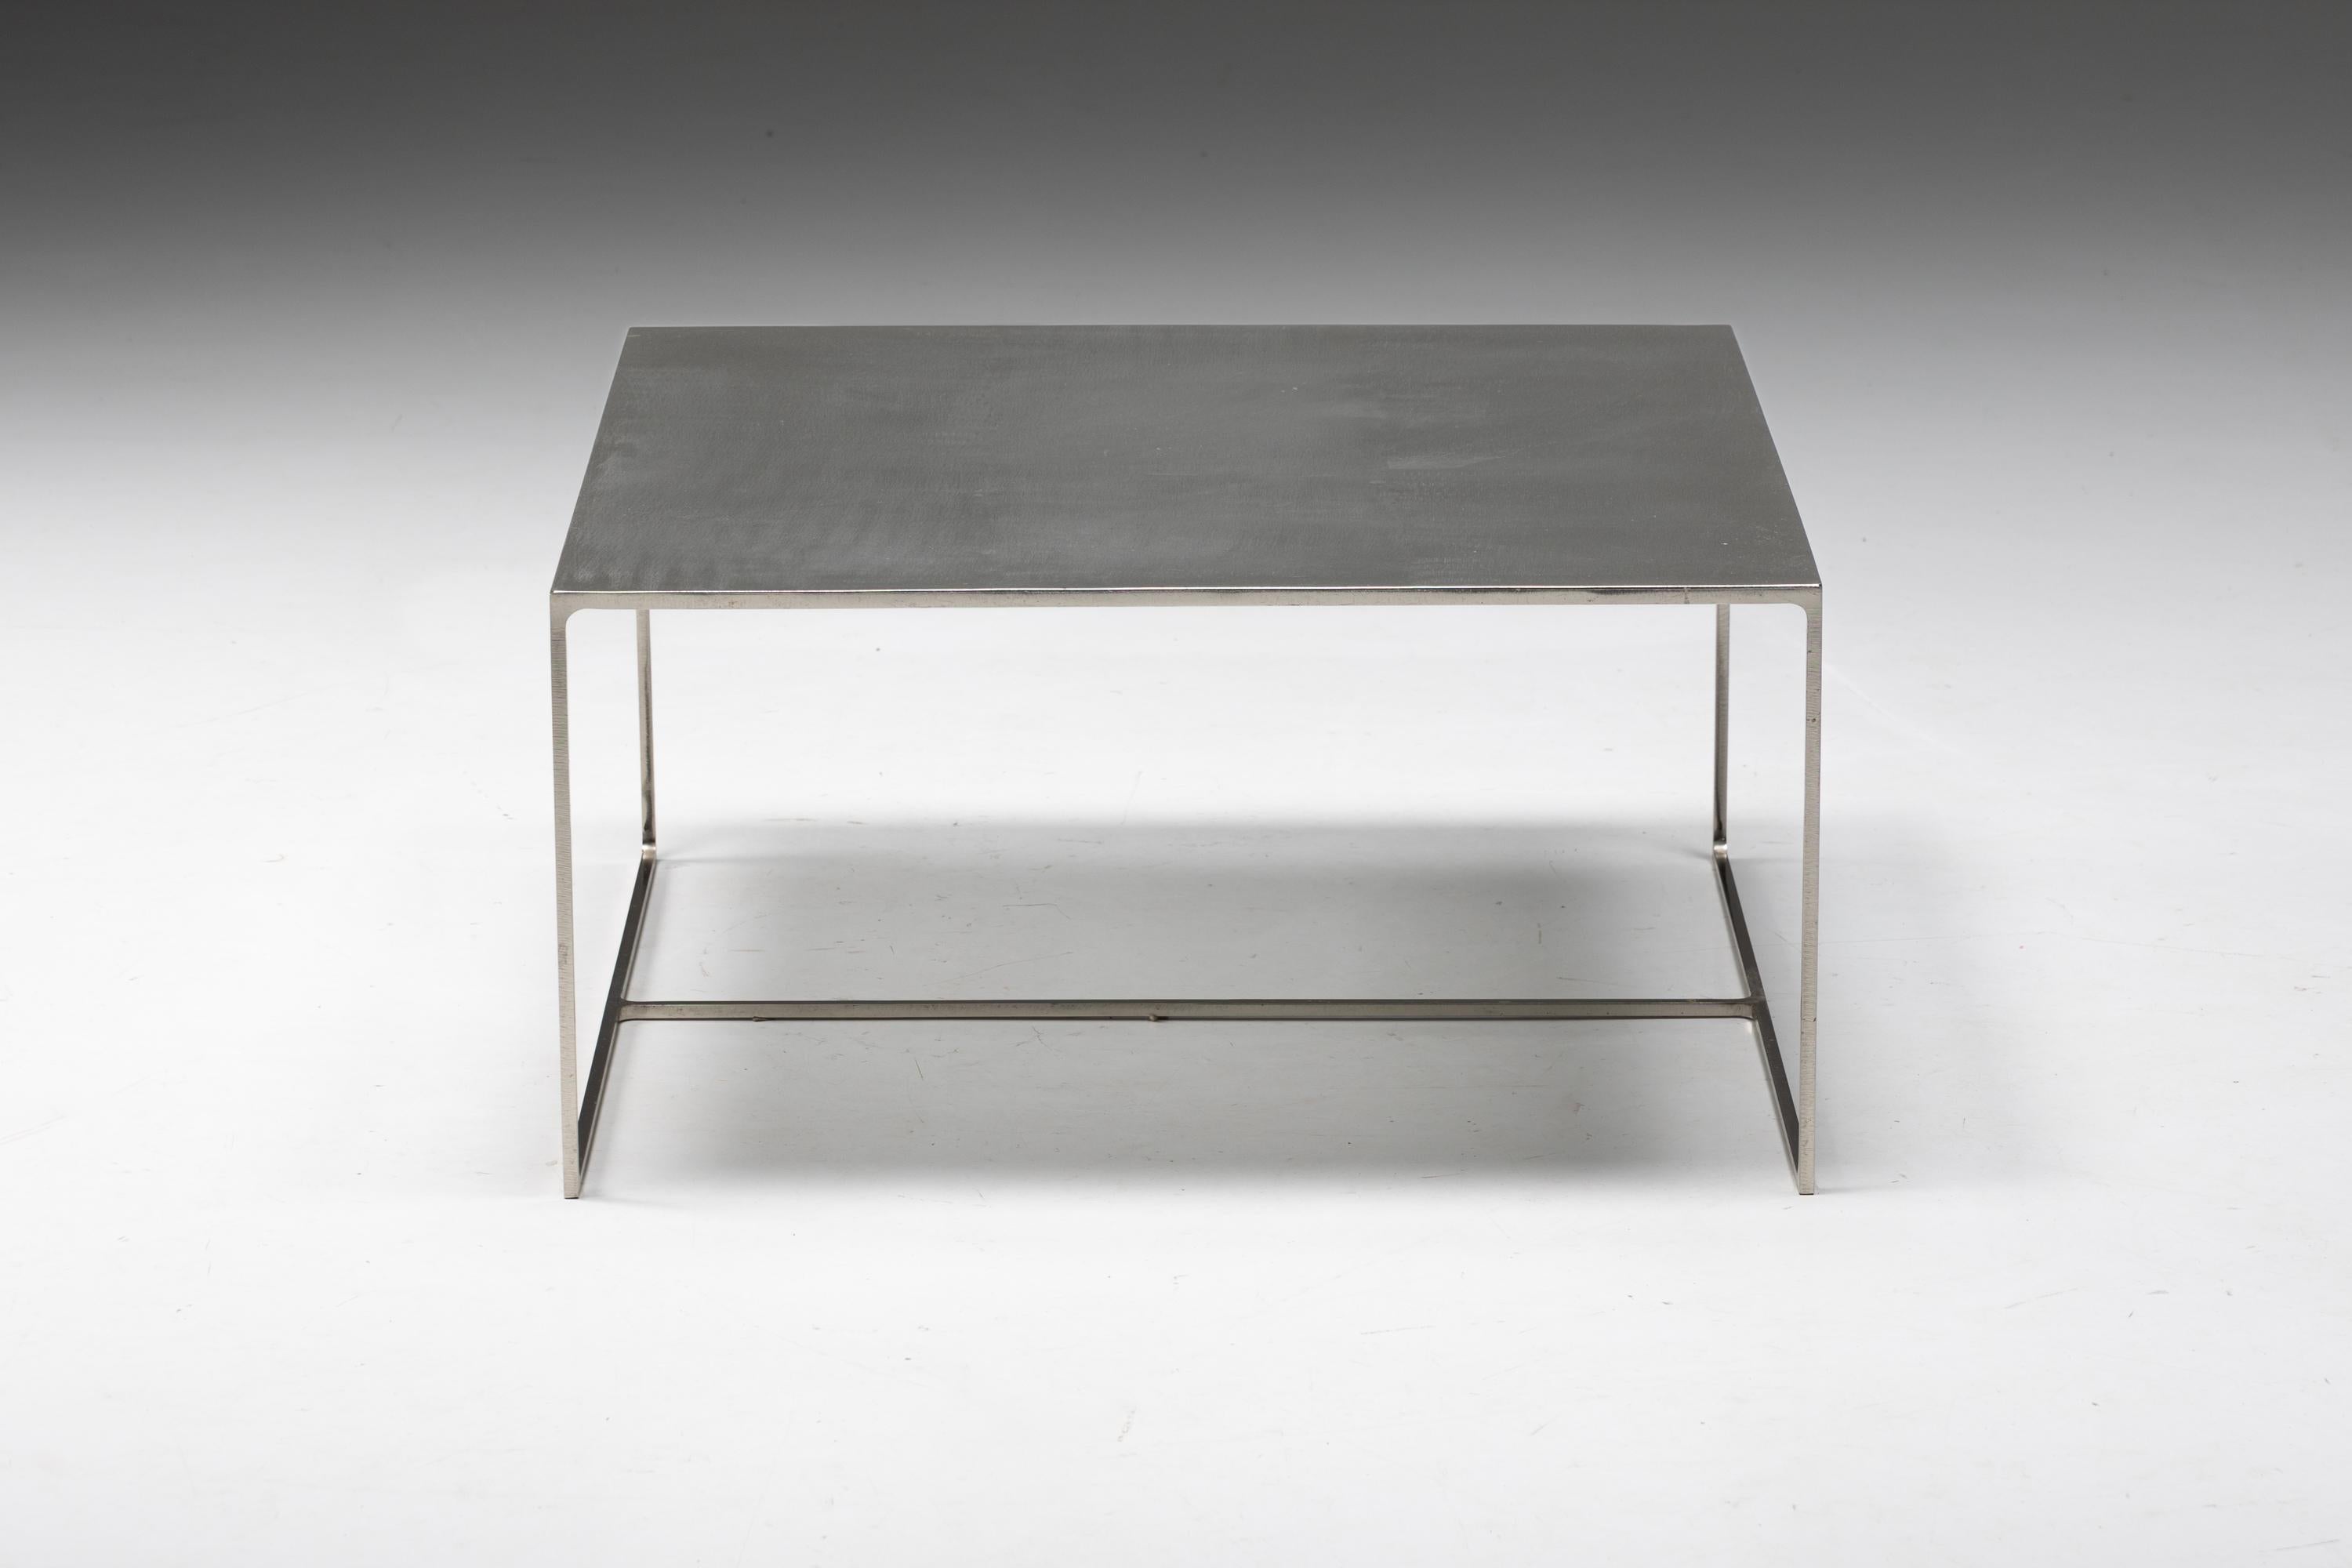 Coffee Table; Minotti; 1998; Rodolfo Dordoni; Square Table; SIde Table; Metal; Modernism; Italy; Minimal Design; 2000s; 1990s

Metal square coffee table, a remarkable piece of furniture designed by the visionary Rodolfo Dordoni in 1998. Crafted with